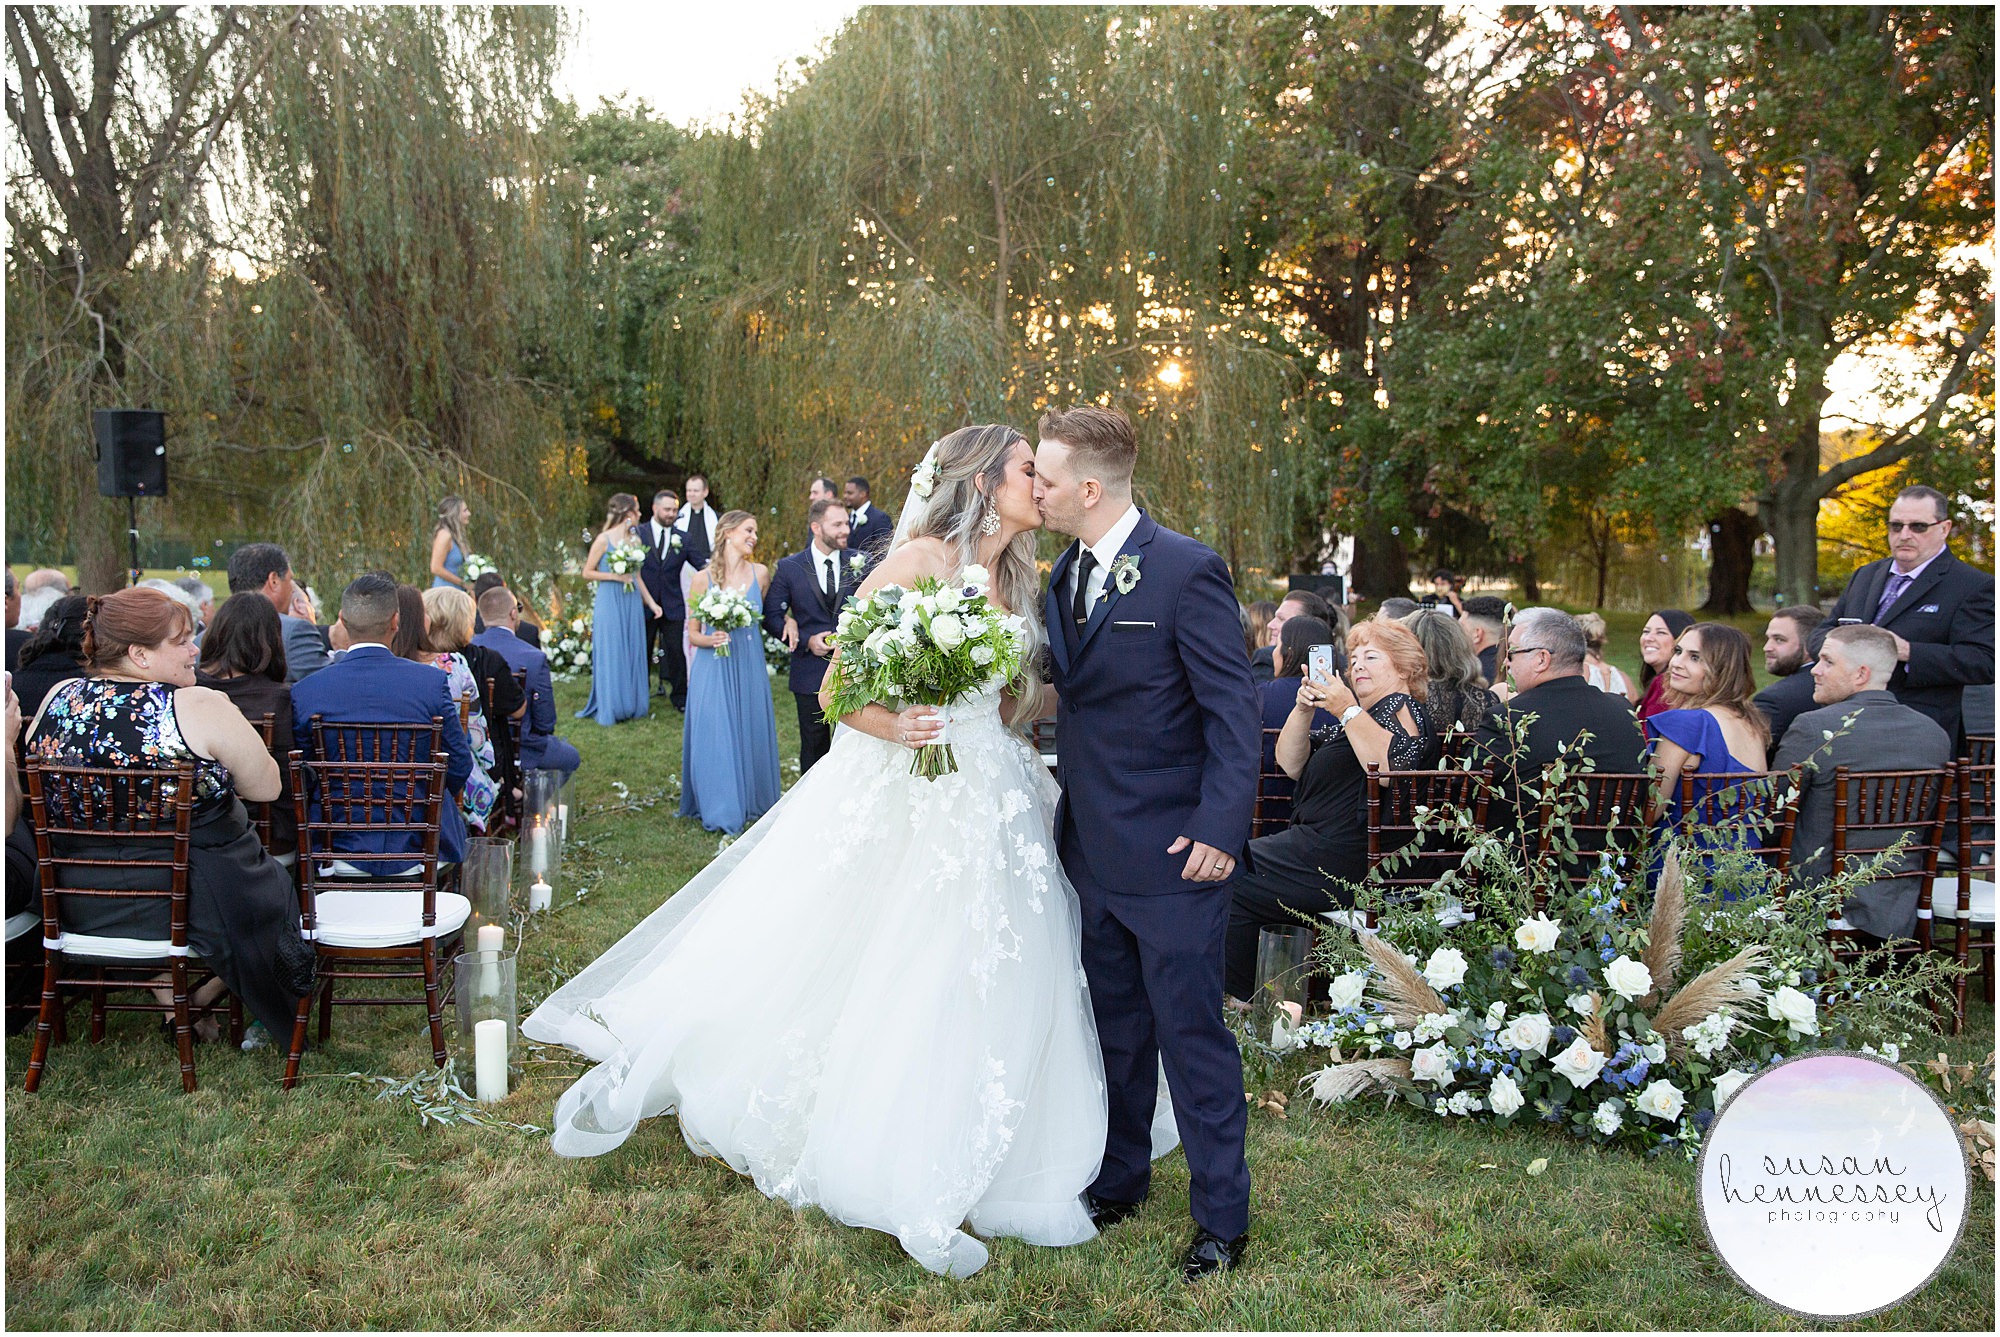 Ceremony in the willow trees at Windows on the Water at Frogbridge Wedding